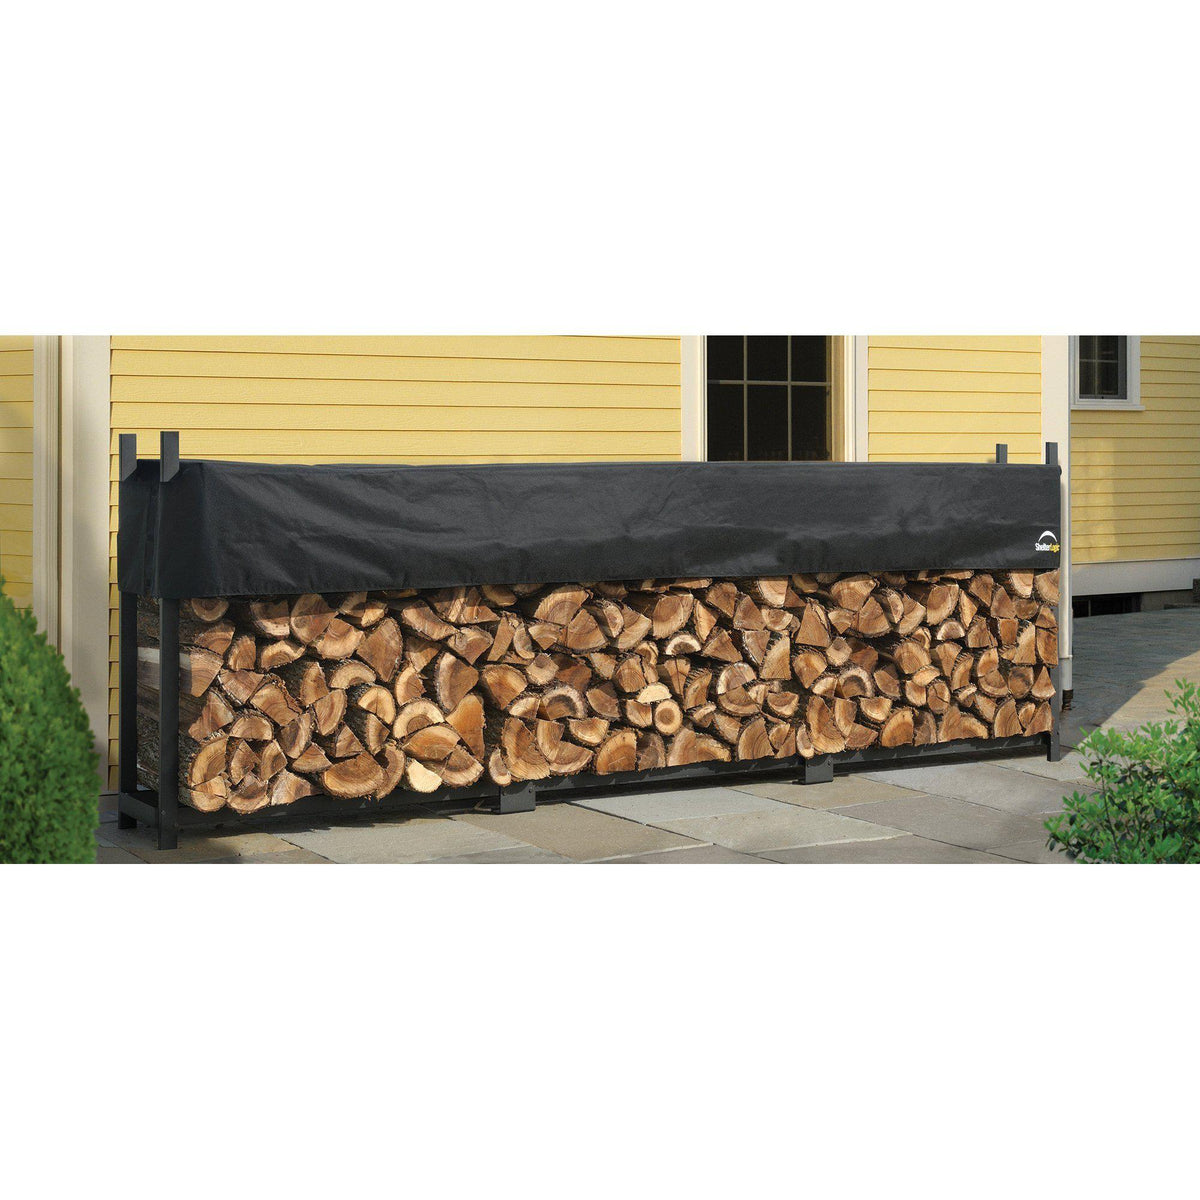 ShelterLogic Ultra Duty Firewood Rack with Cover, 8 ft.